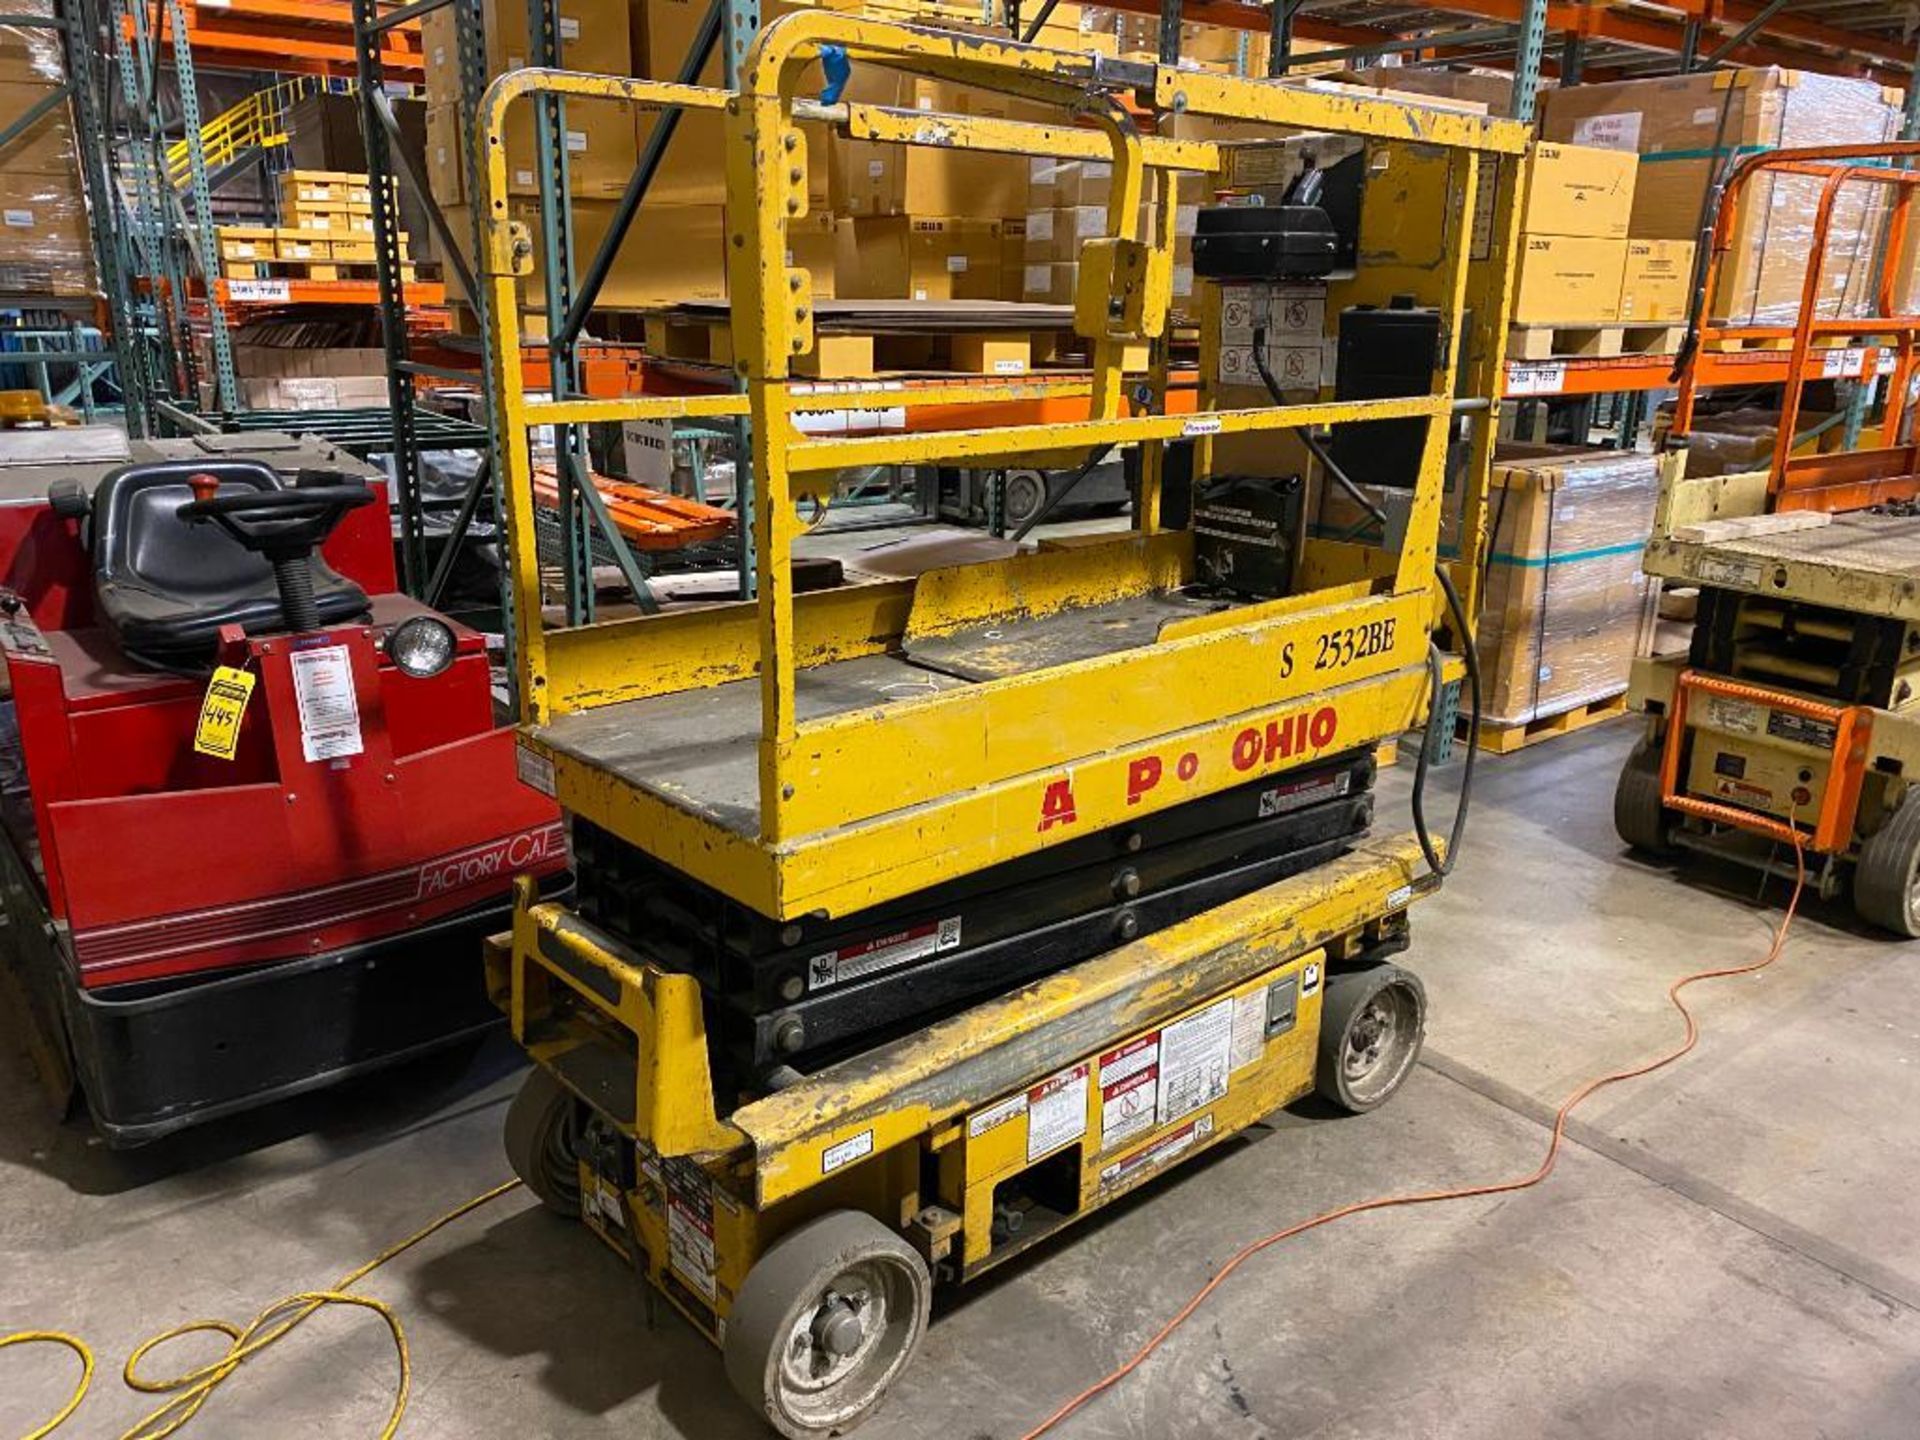 2000 Grove Scissor Lift, Model SM2532BE, S/N 256159, 19' Max. Height, On-Board Charger - Image 4 of 6